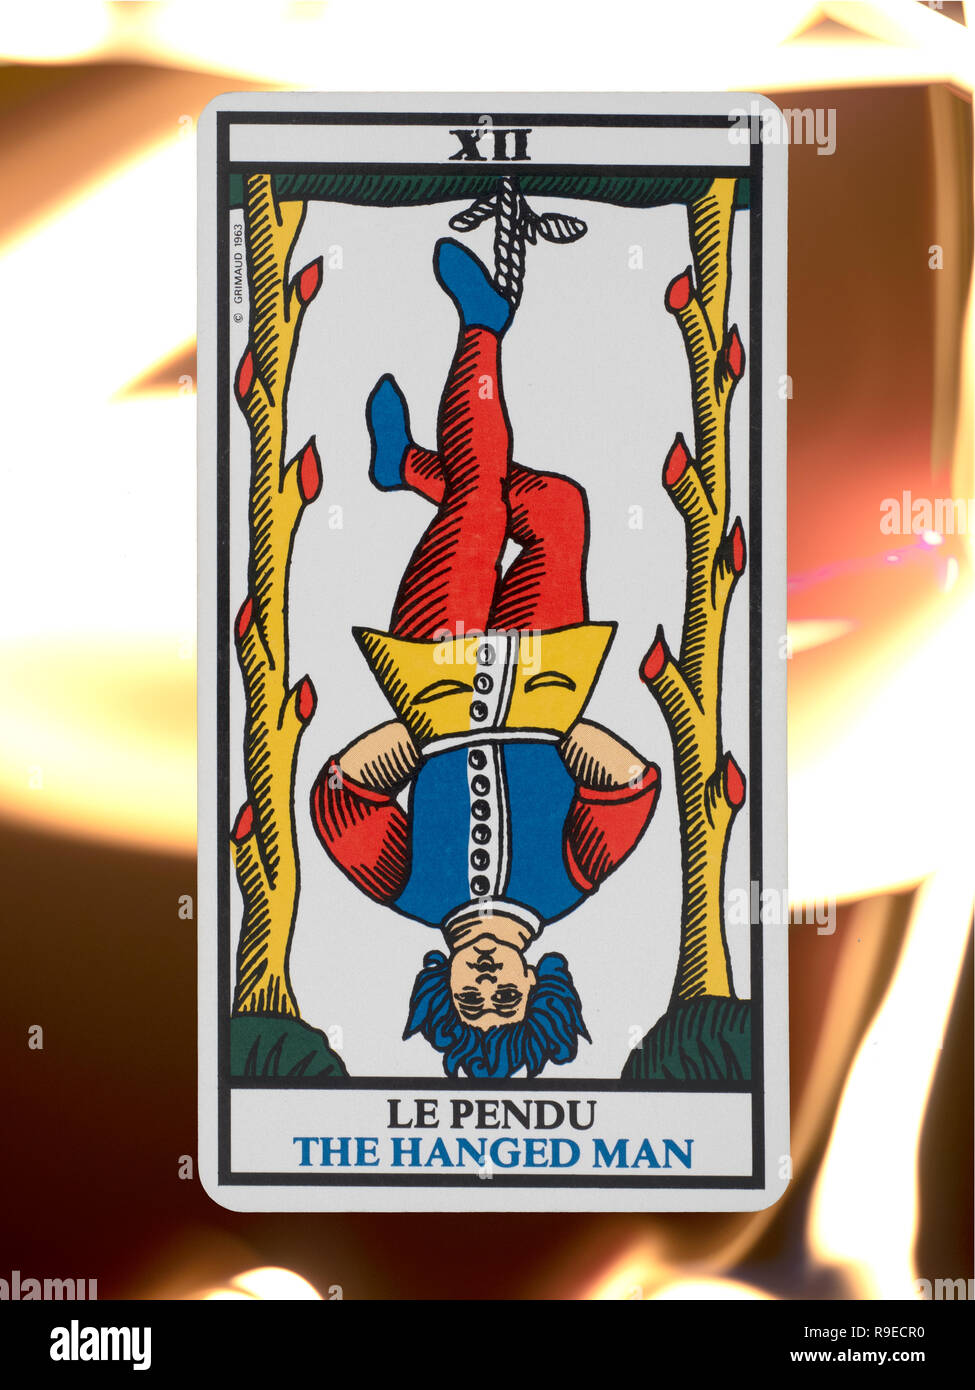 The Hanged Man, tarot card from a deck of the Tarot de Marseille, floating  on a burning flame background Stock Photo - Alamy